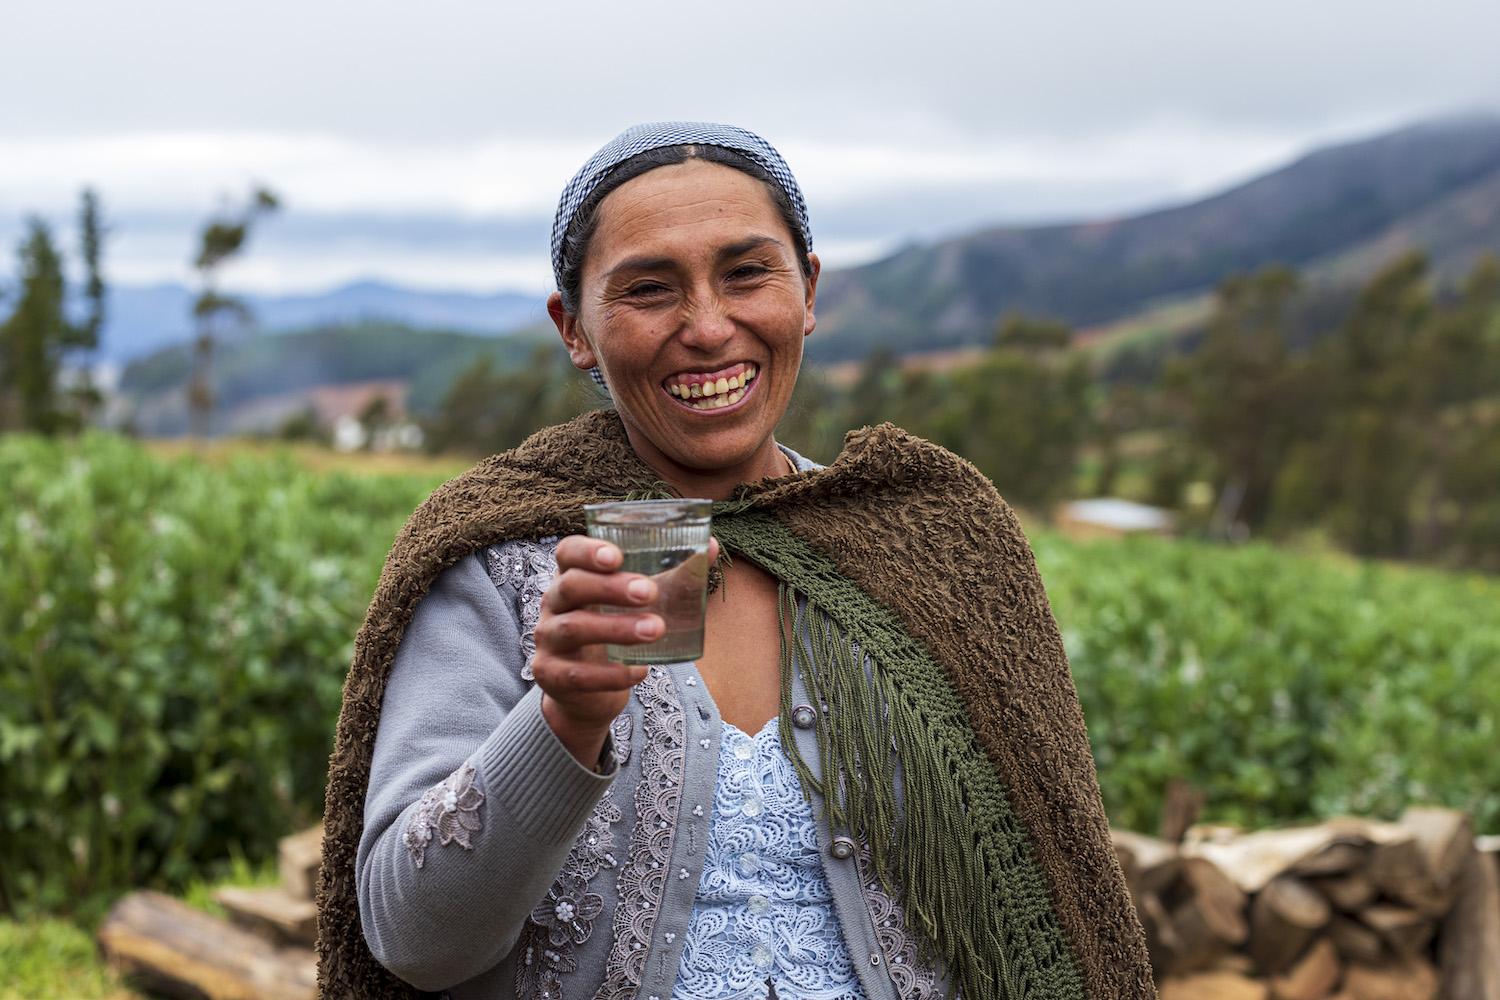 Bolivian Woman Holding Glass of Water - Access to Sanitation and Clean Water Through Humanity-Centric Innovation